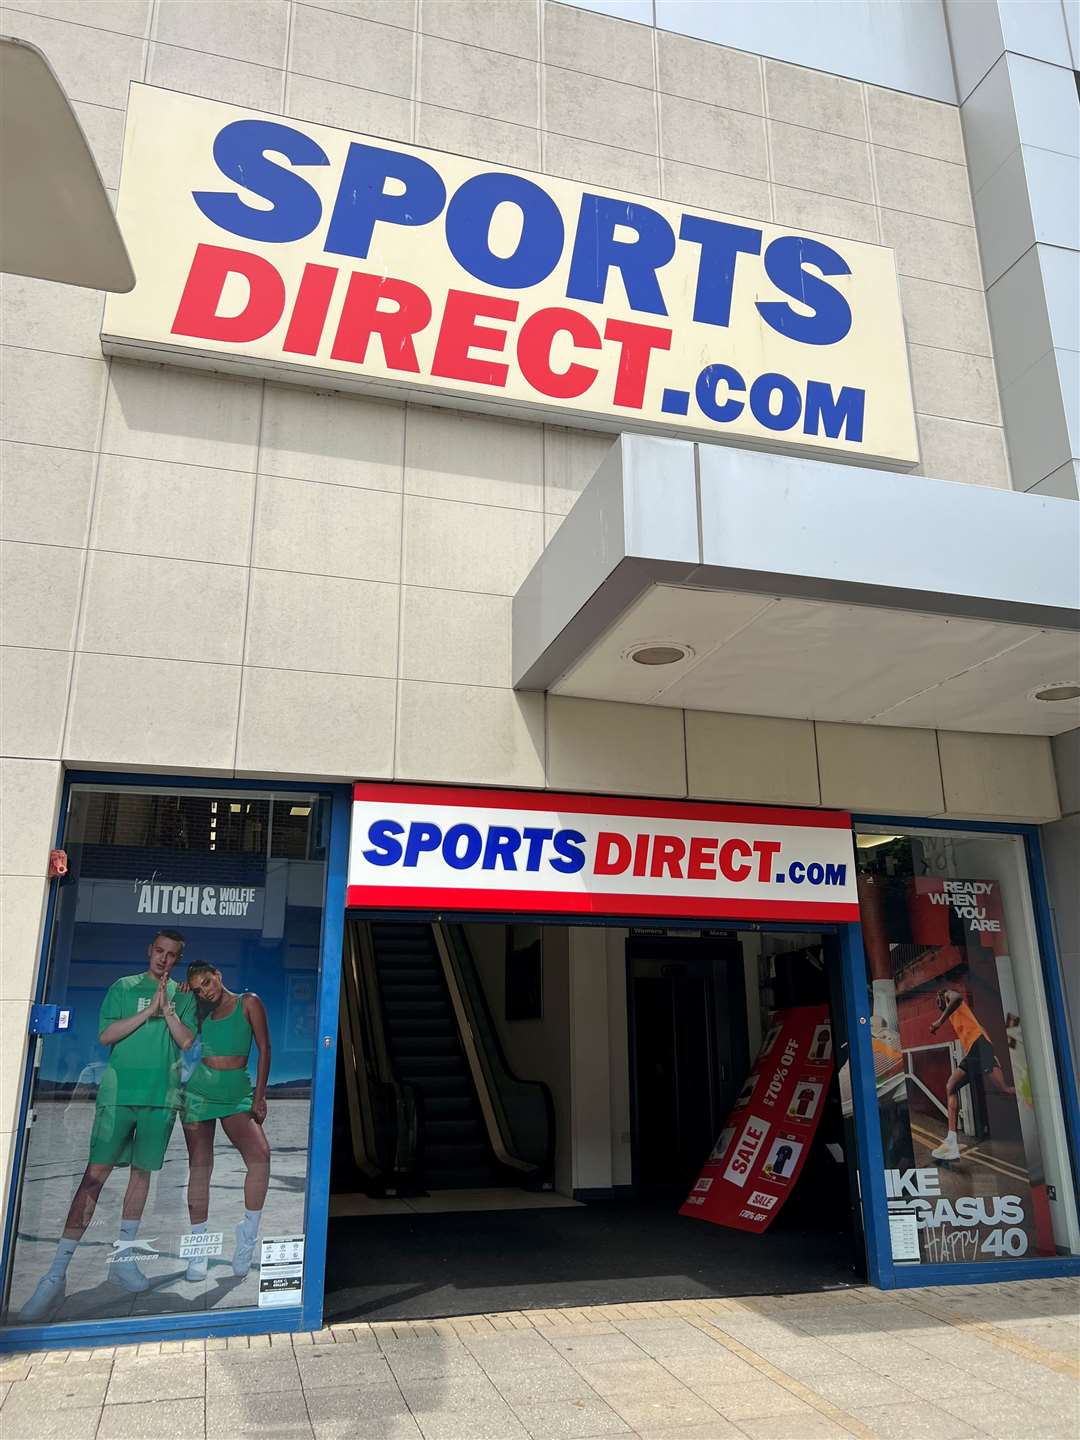 Aiden Cullen tried to steal from the Sports Direct store in Lynn